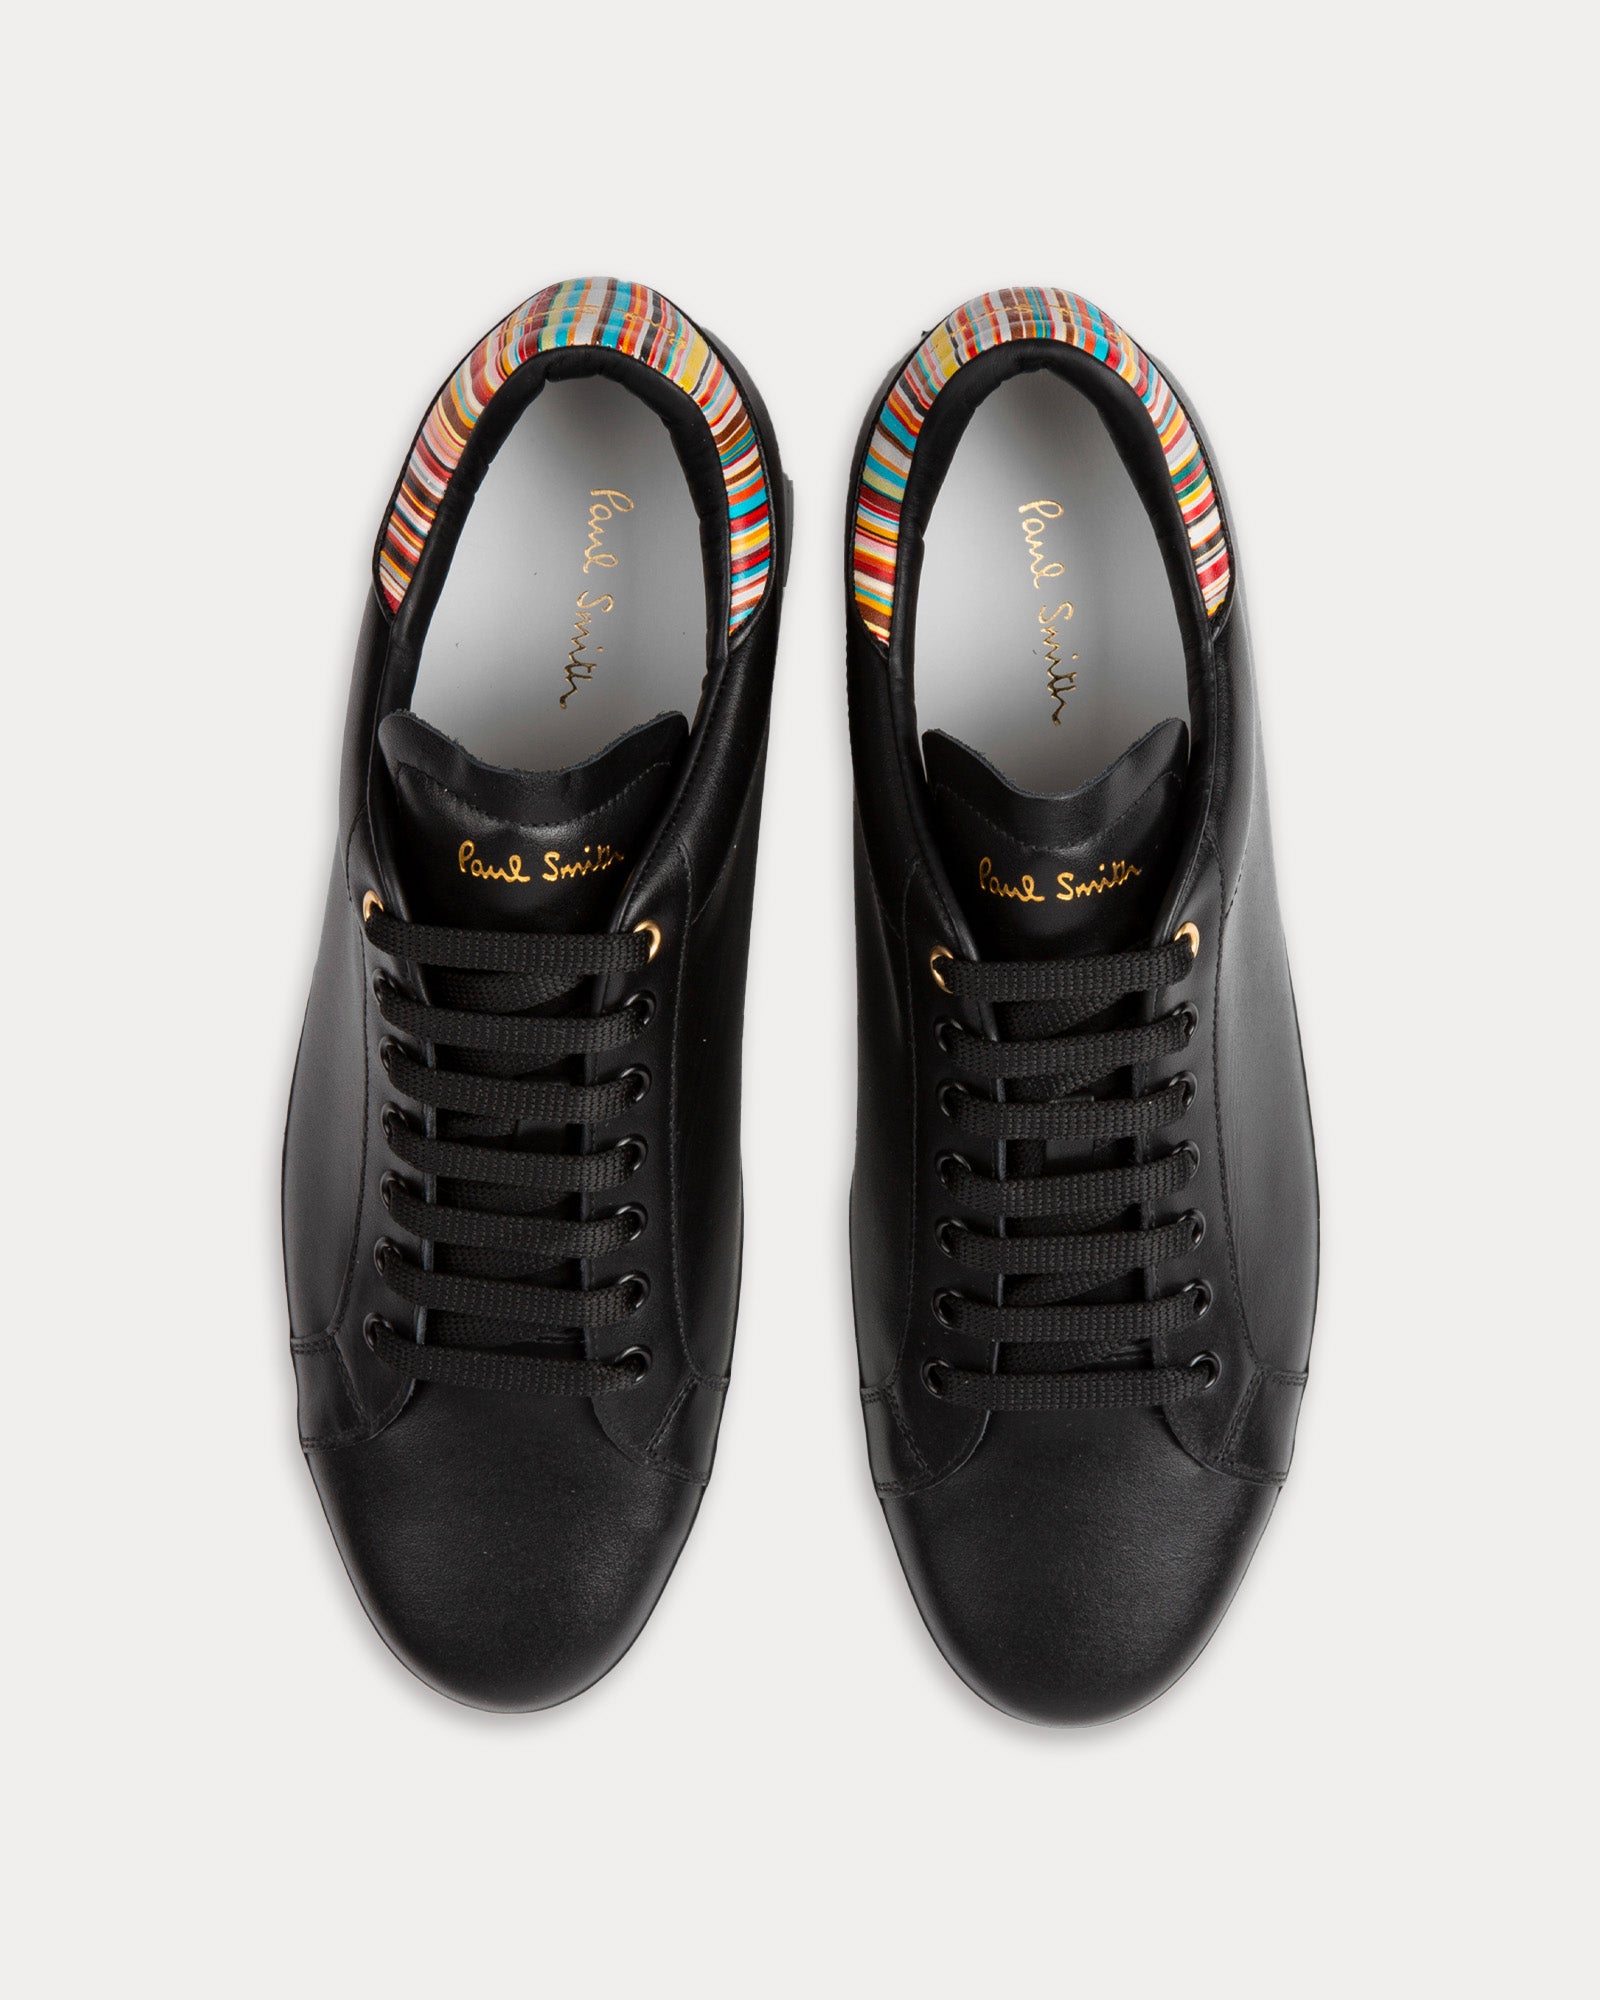 Paul Smith - Beck with Signature Stripe Leather Black / White Low Top Sneakers